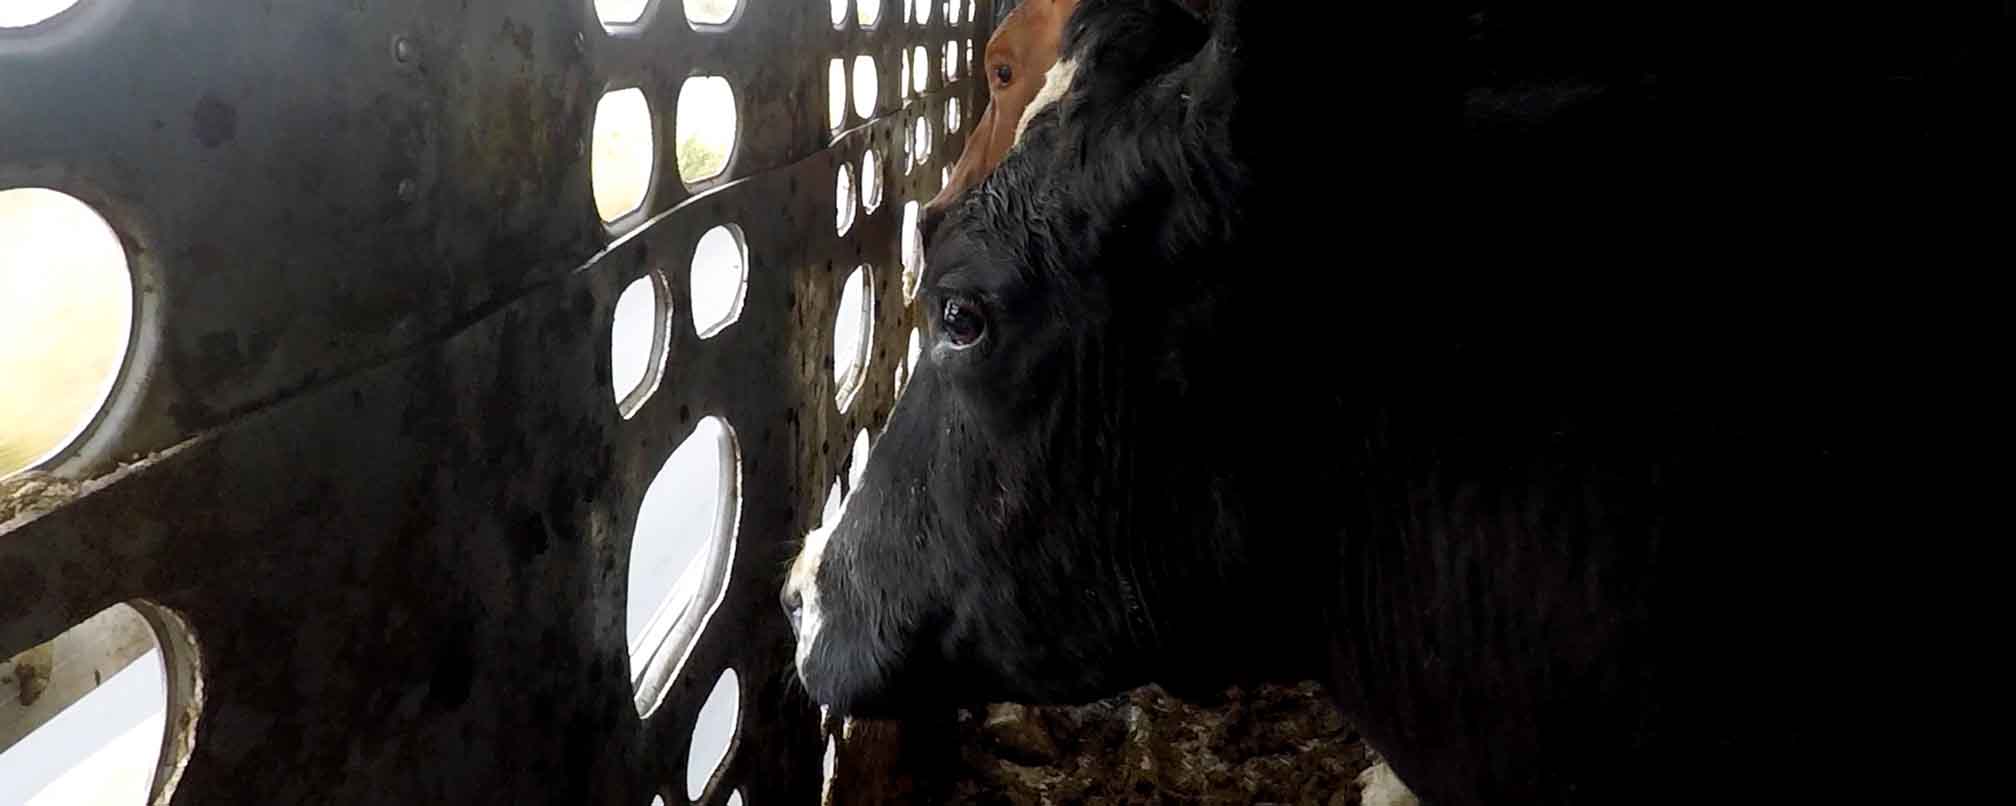 Cow inside a truck being transported to a slaughterhouse